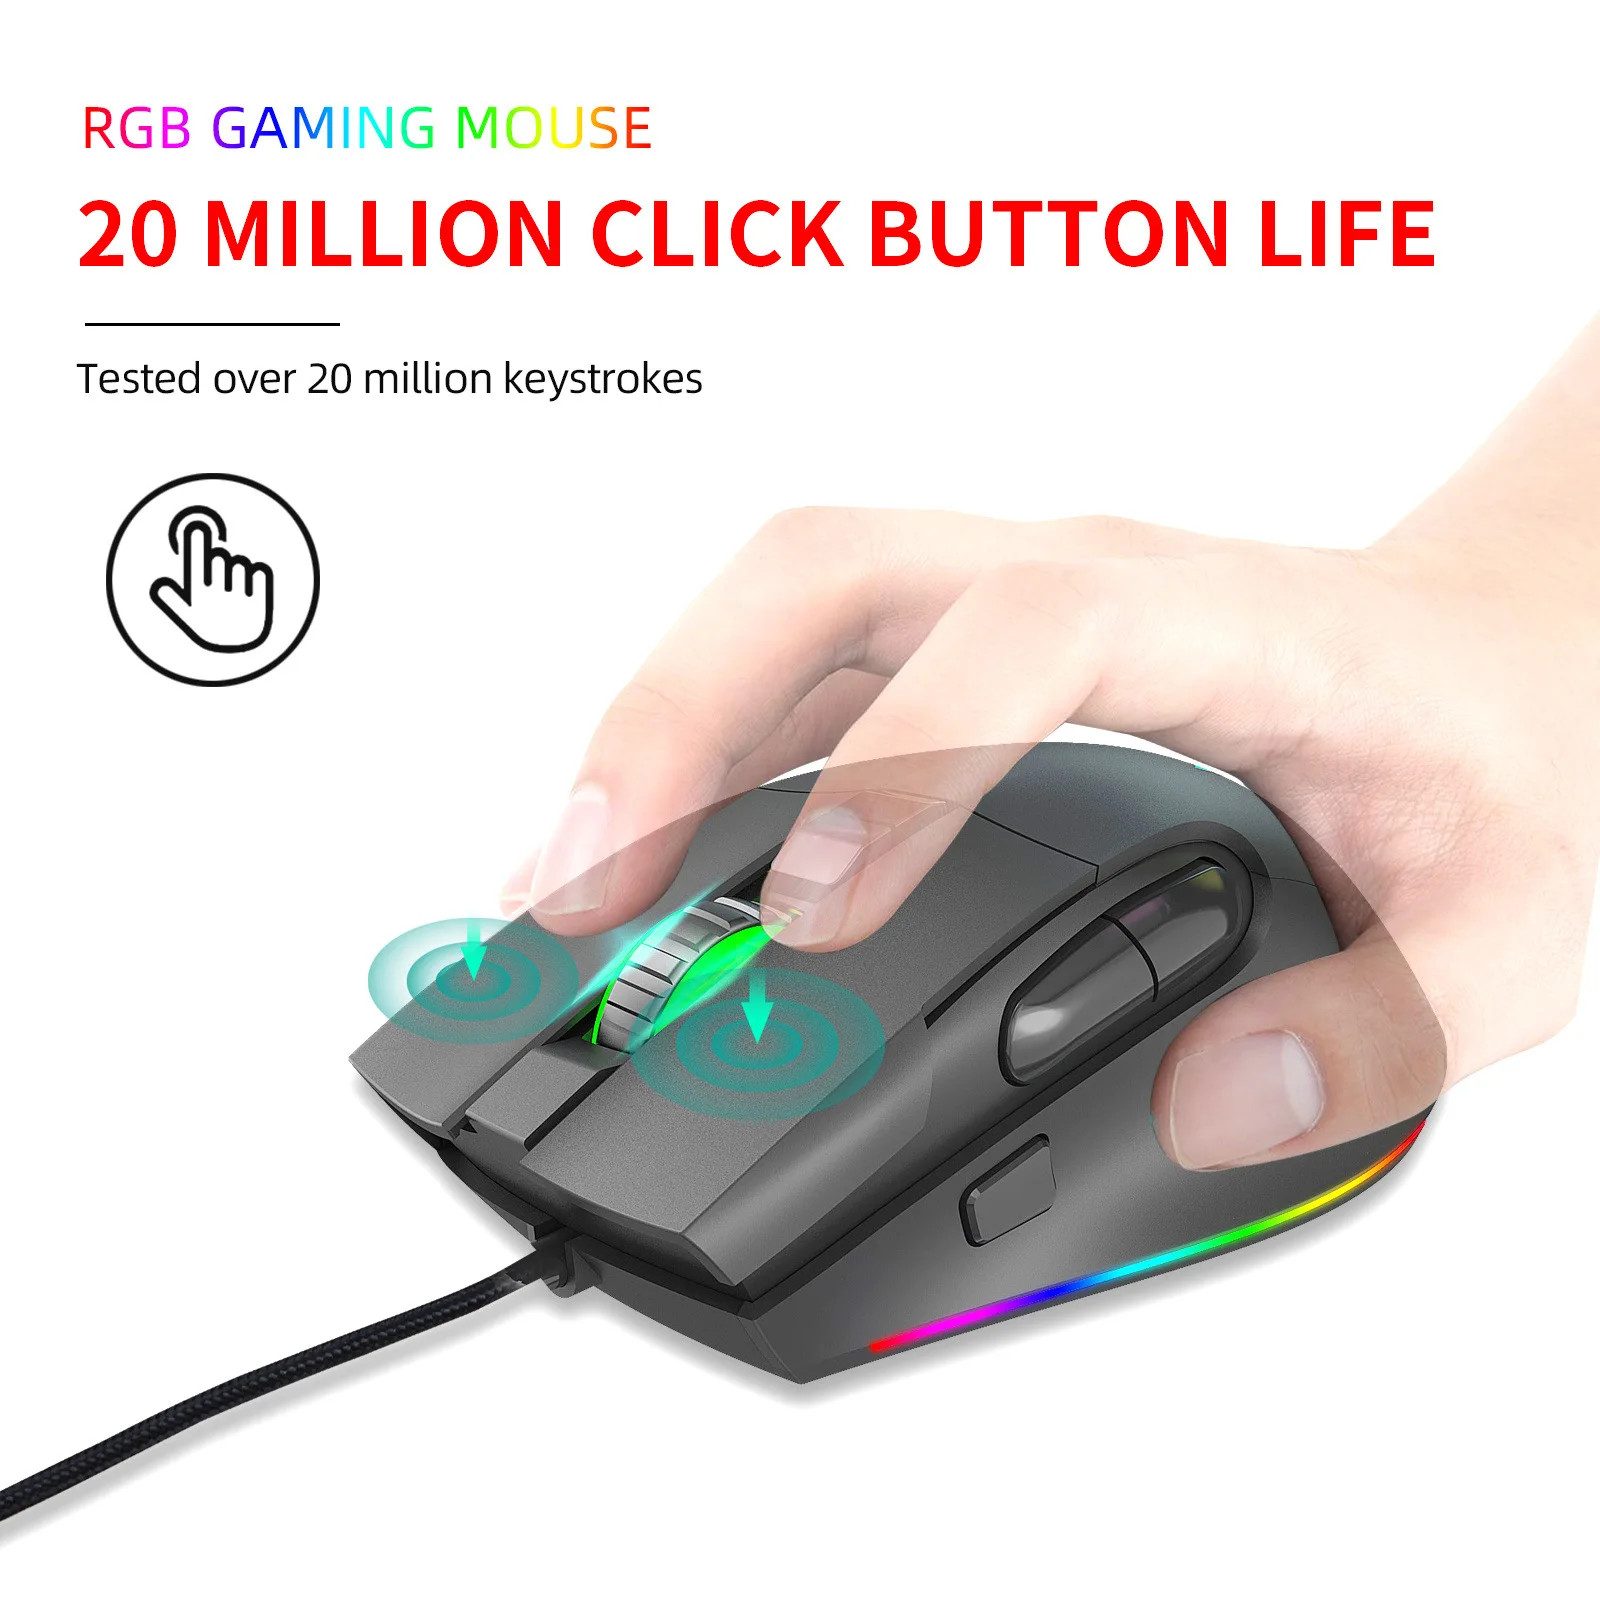 Gaming Mouse Programmable Wired Mouse 7200DPI 8 Button USB Computer Mouse Gamer RGB Mice With Backlight Cable For PC Laptops best gaming mouse for large hands